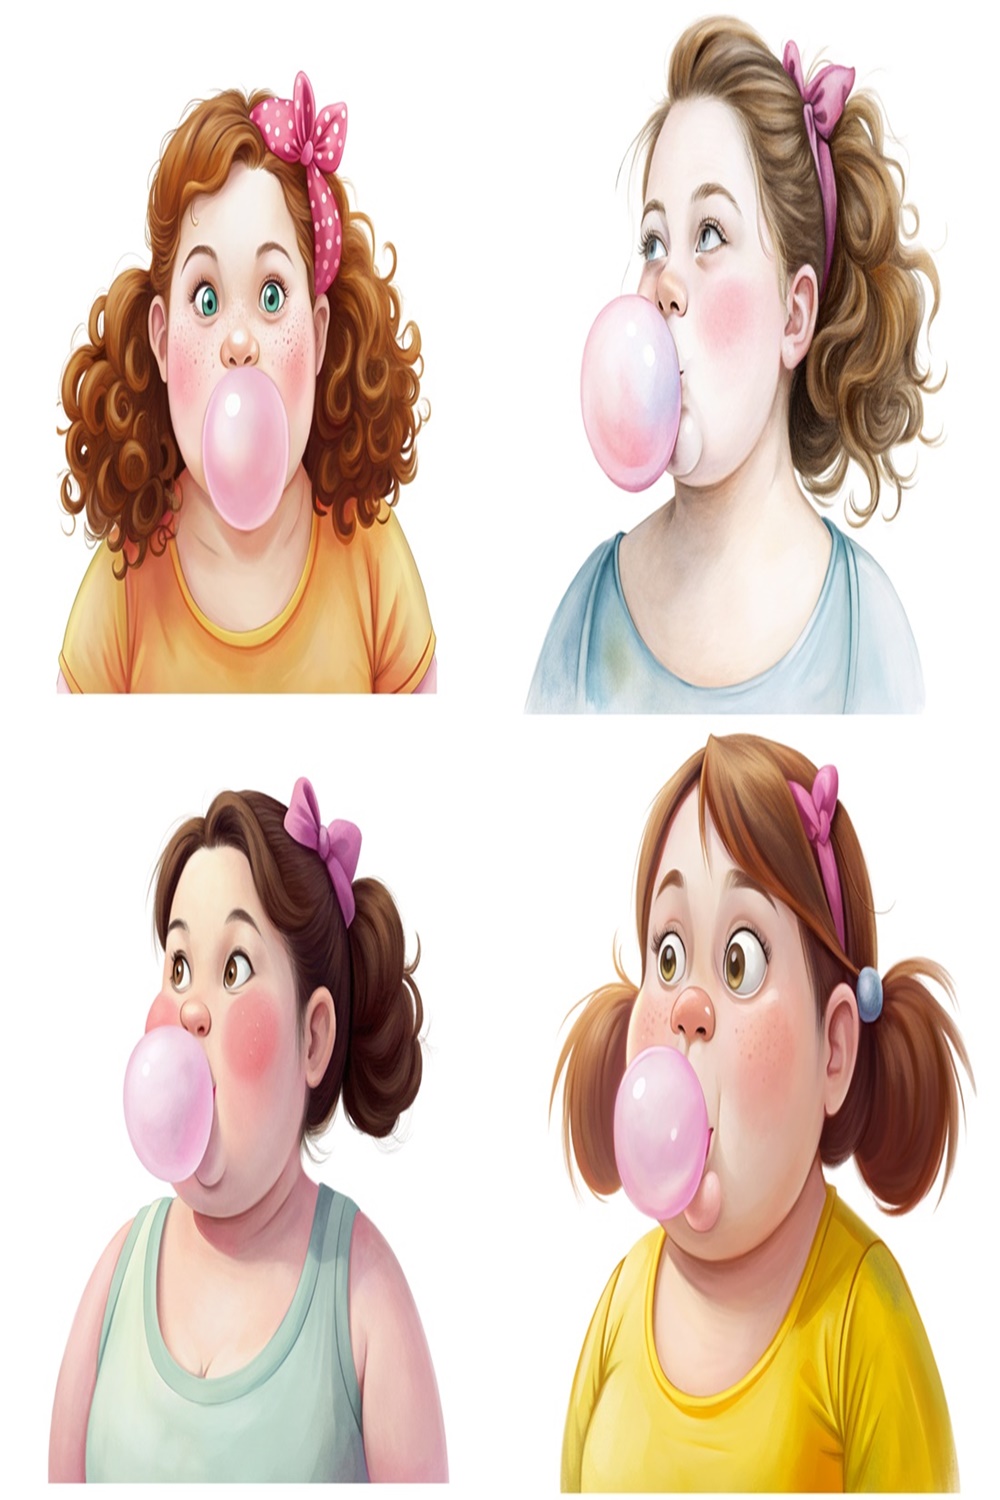 Cheerful girl blowing bubble gum, Fun clipart, Cheerful clipart, Self love clipart, Body positivity, Vector clipart, 6 transparent PNG pinterest preview image.